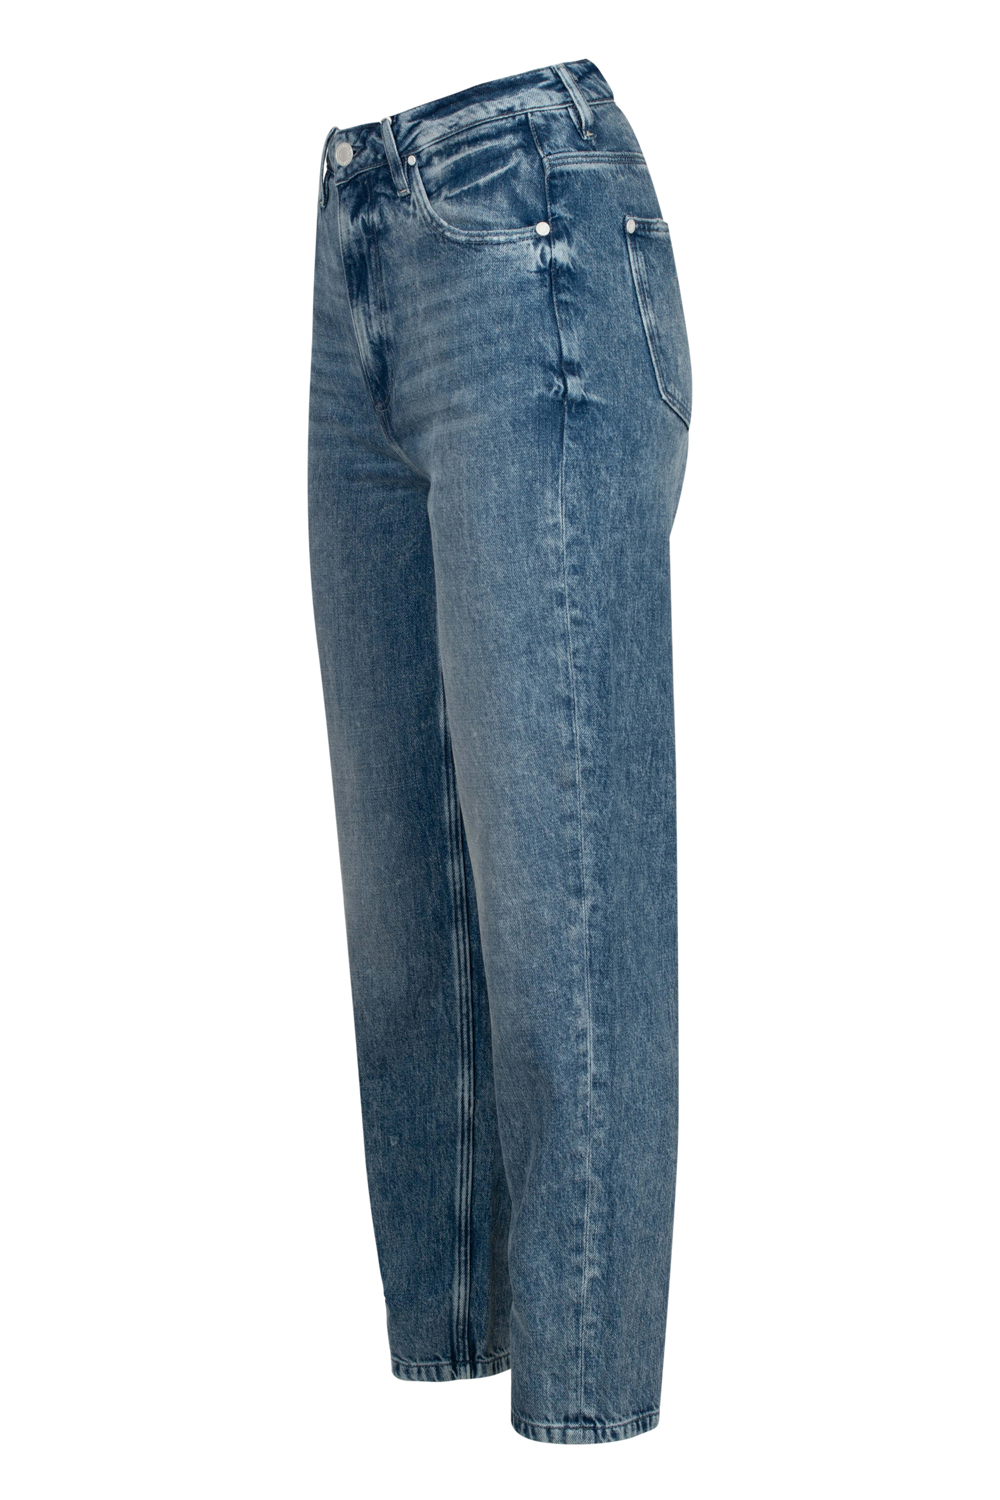 High Rise “Carrot” Style Vintage Jeans